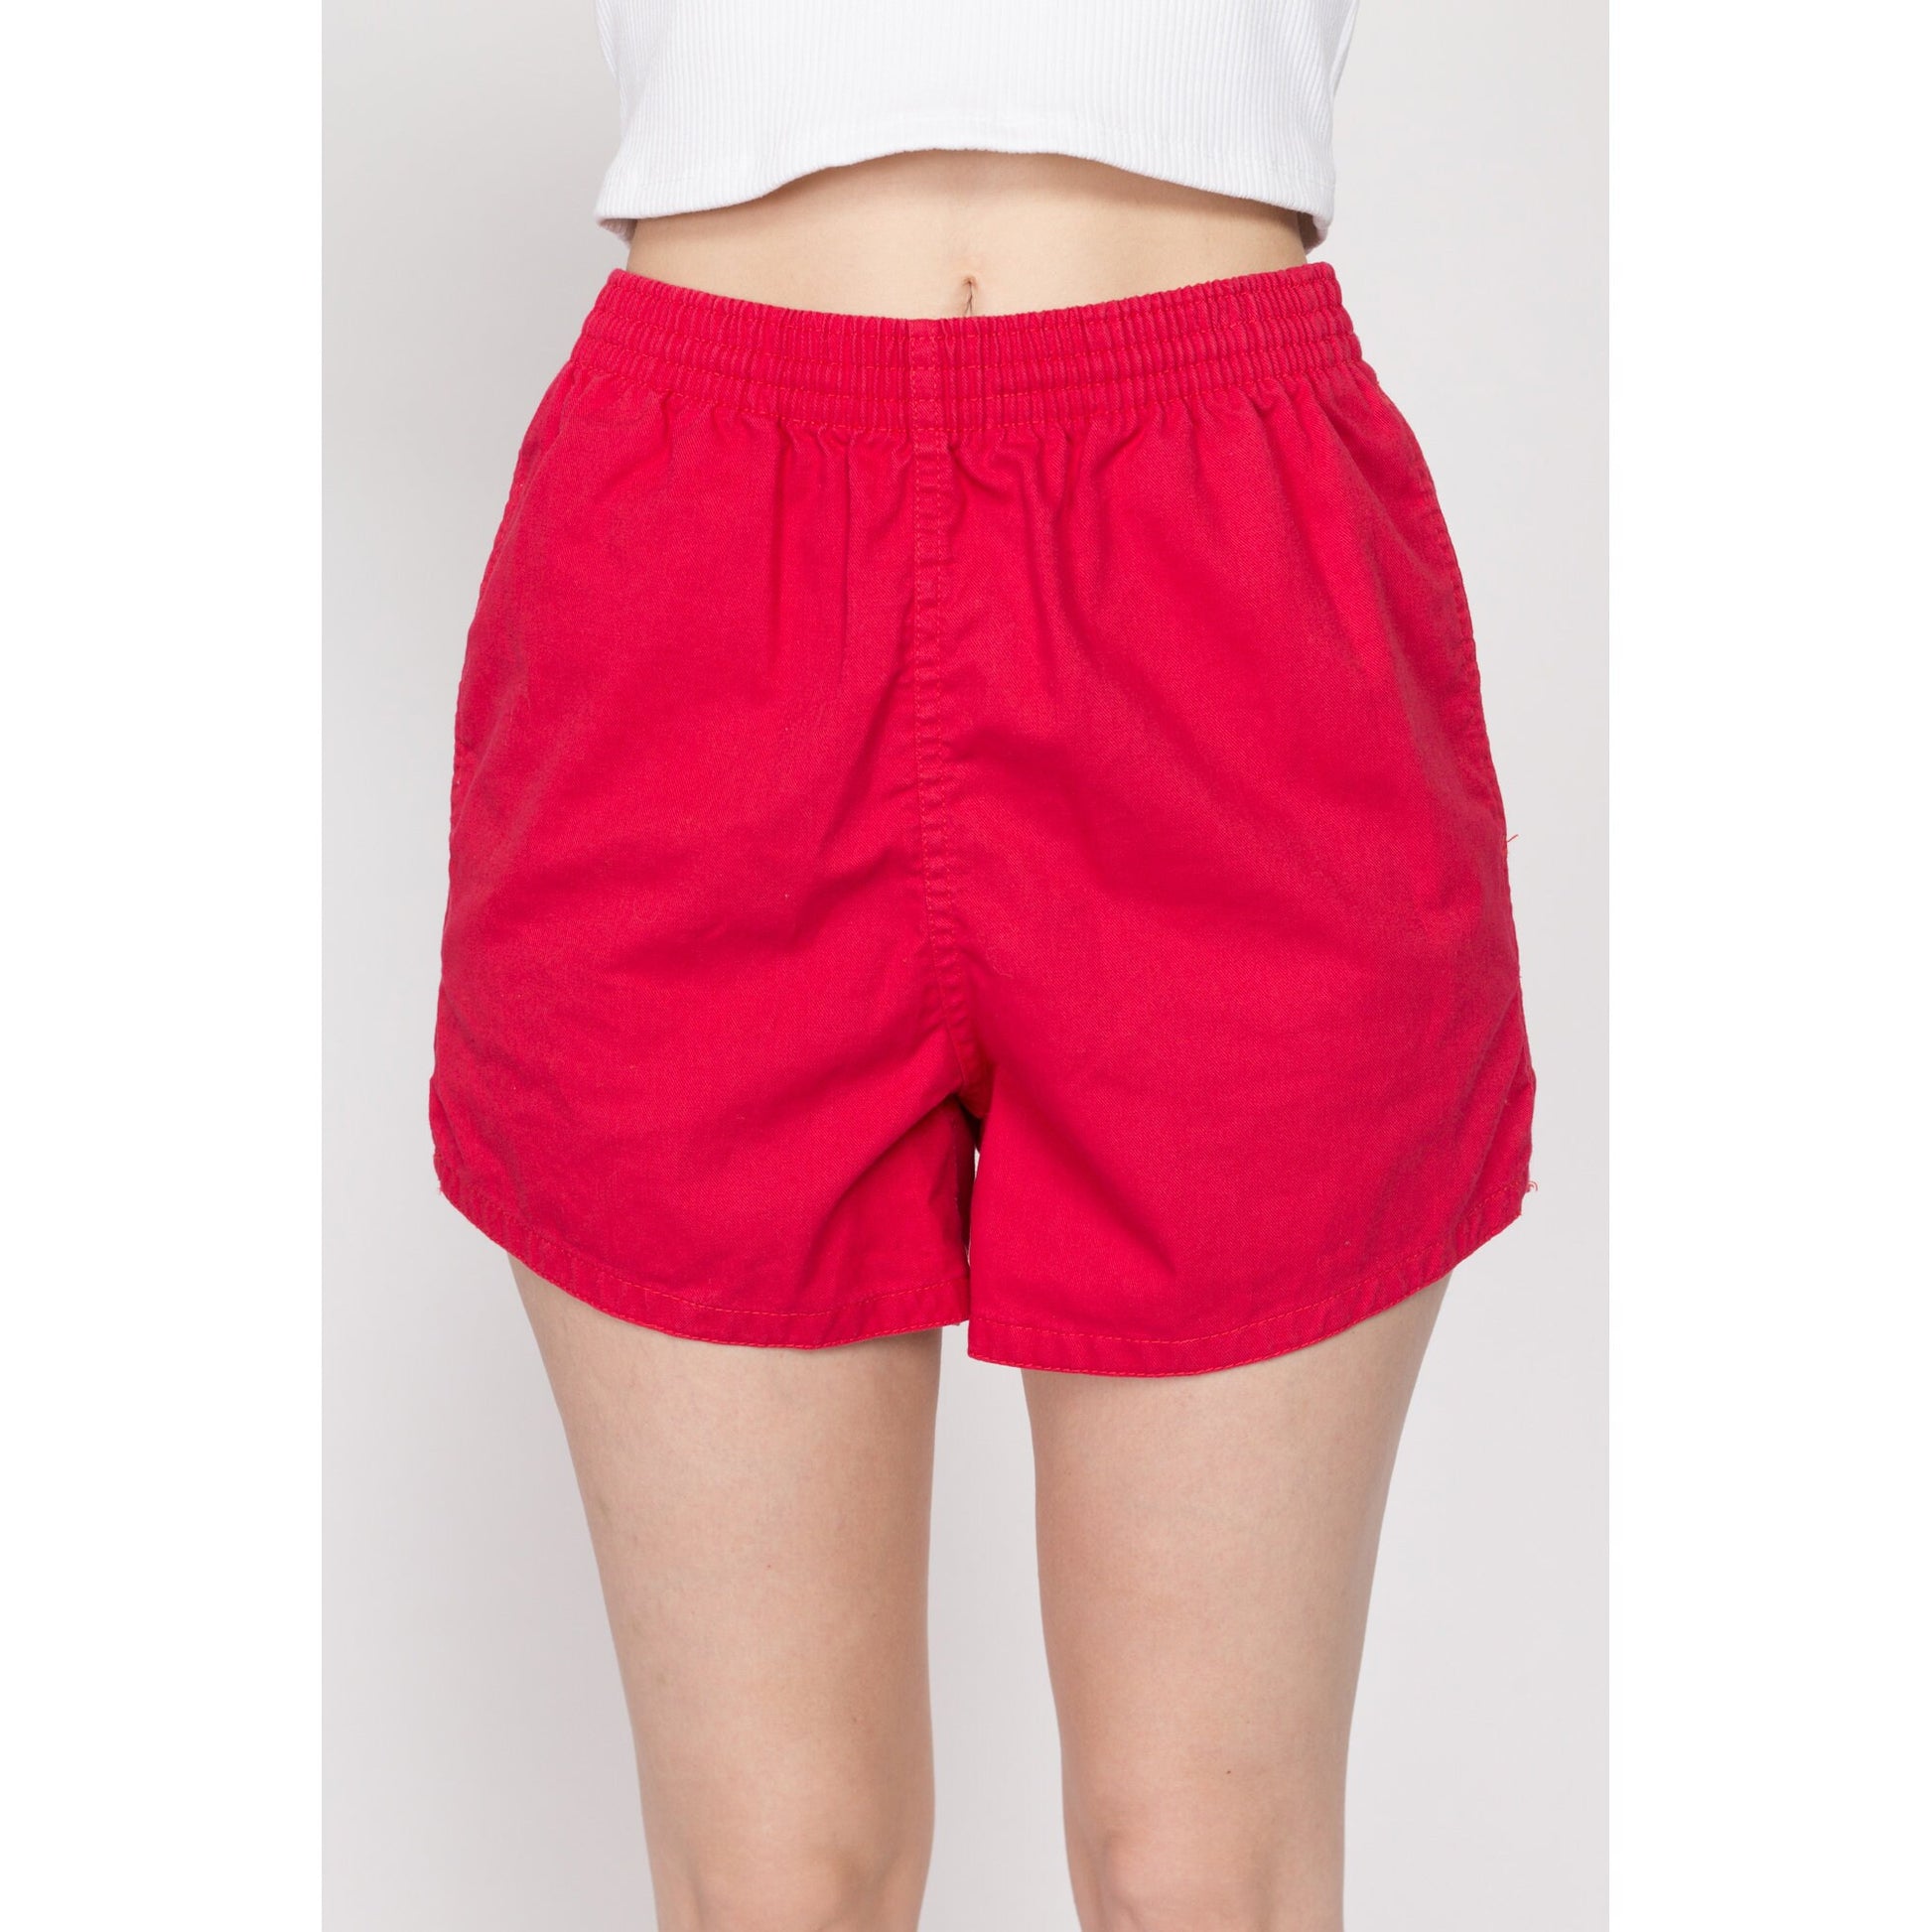 Small 90s Red Cotton Elastic Waist Shorts | Vintage High Rise Causal Pocket Athletic Shorts